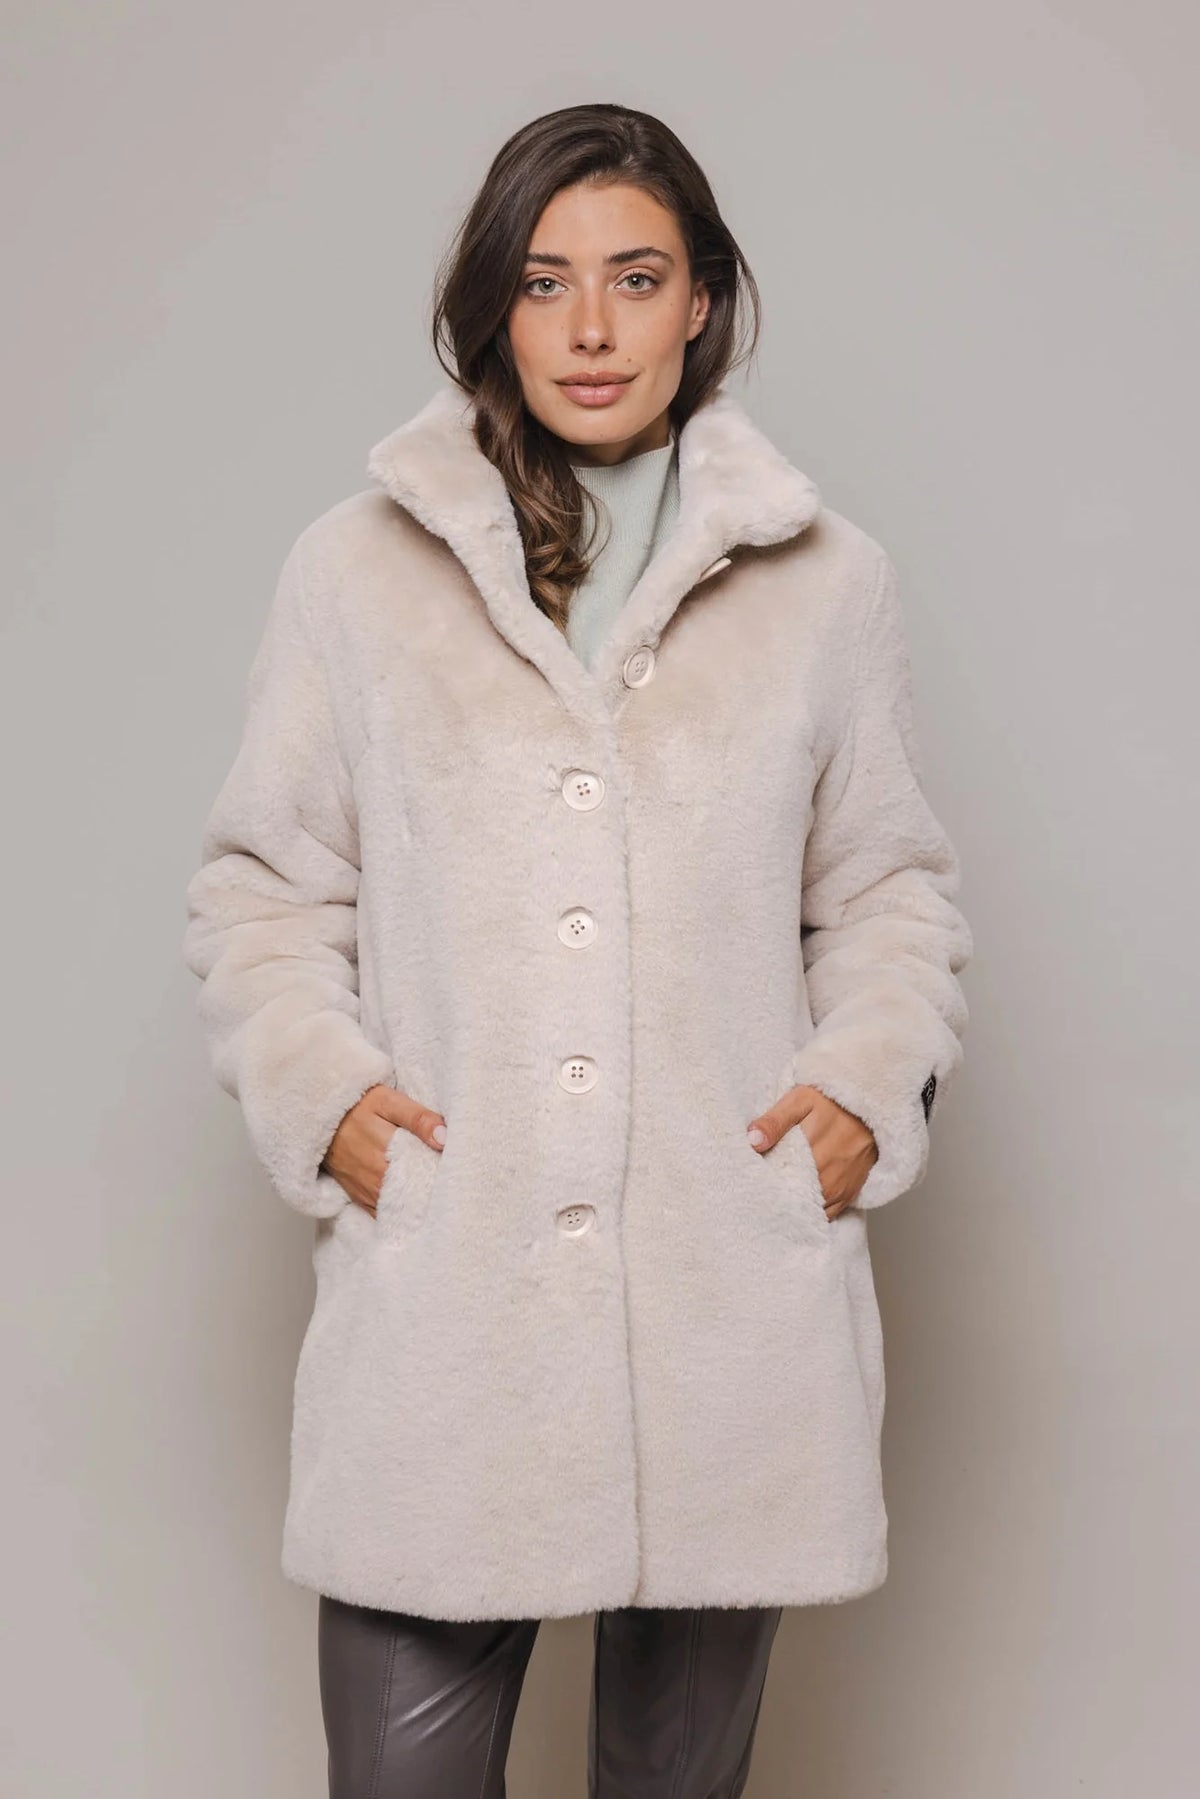 Stone coloured midi length faux fur coat with classic collar and button fastening